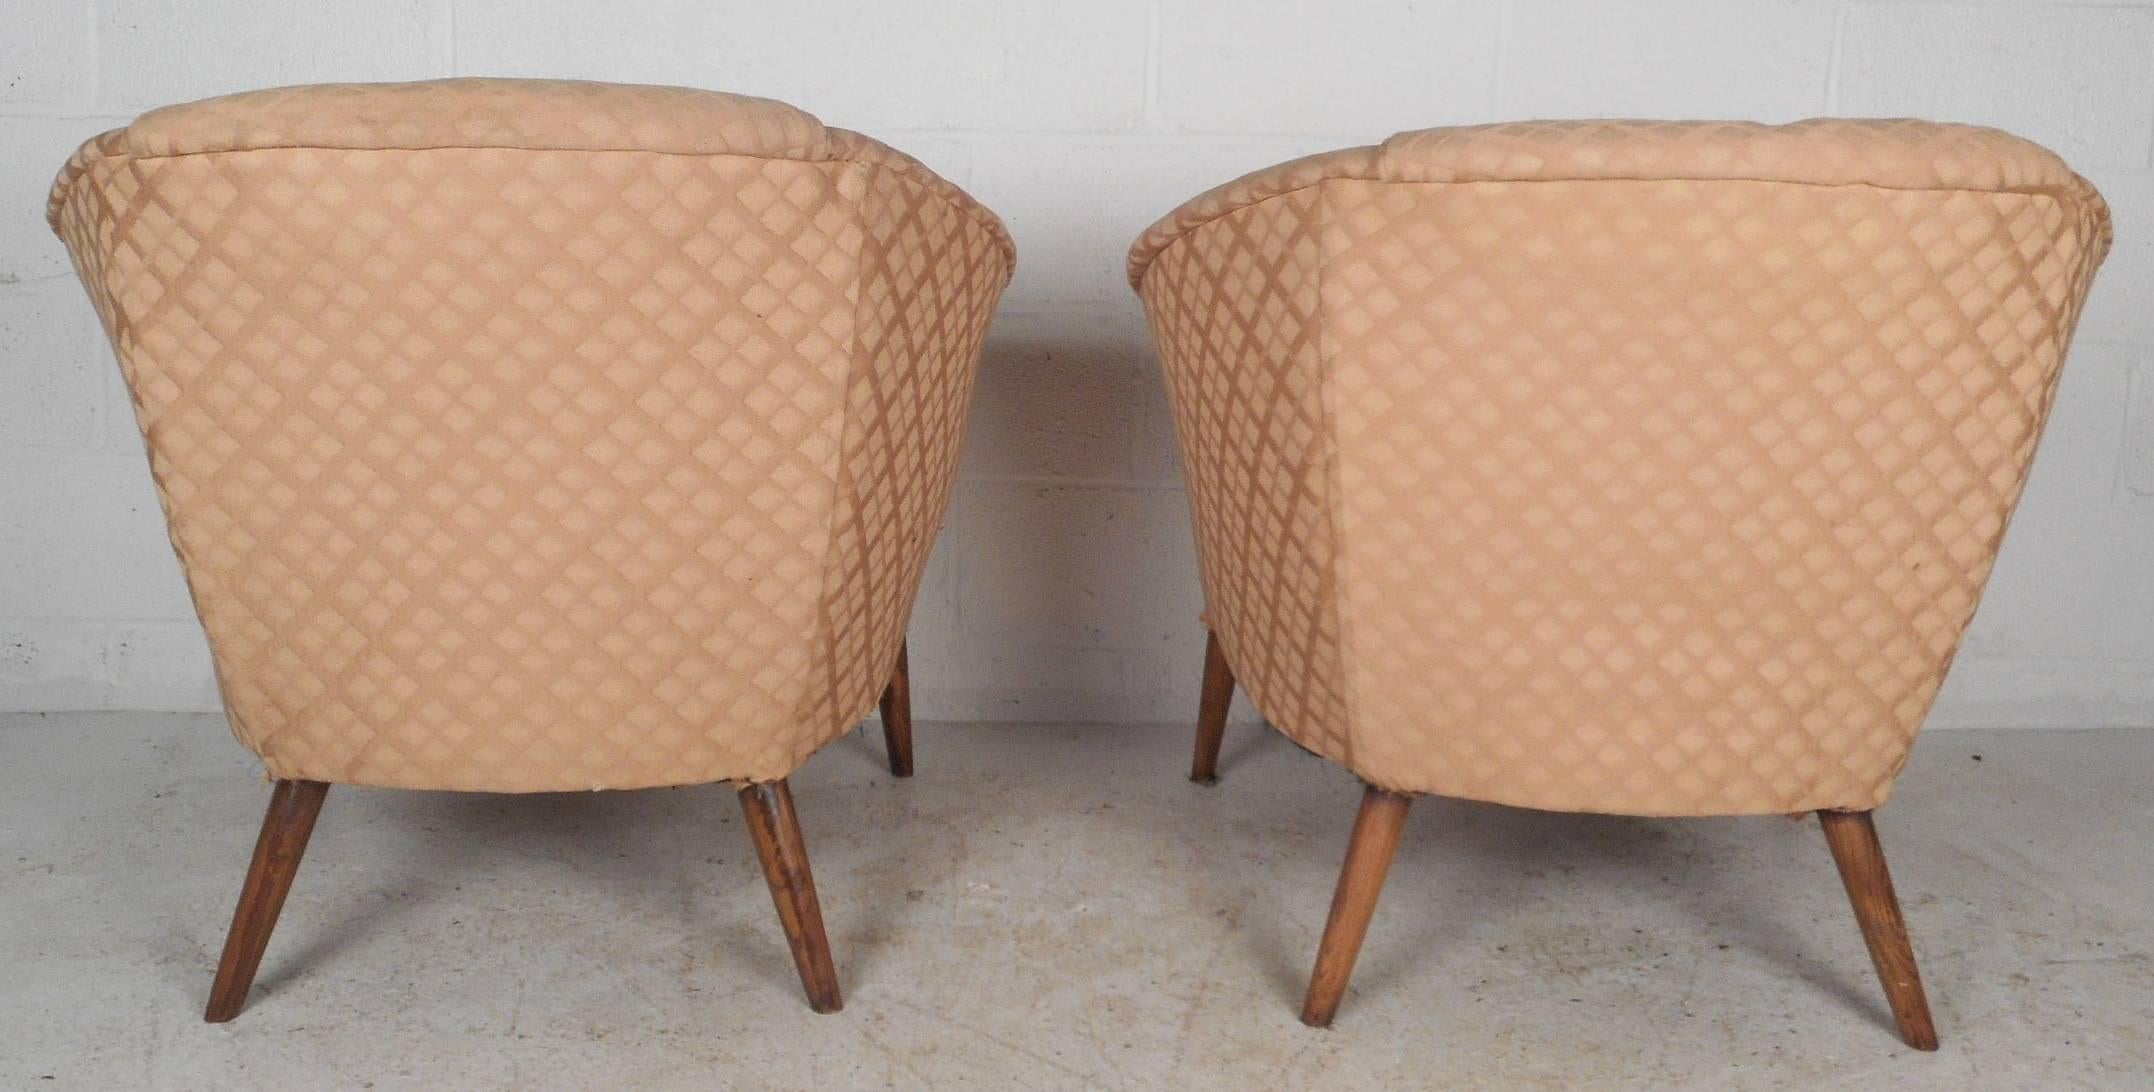 Upholstery Mid-Century Modern Barrel Back Tufted Lounge Chairs